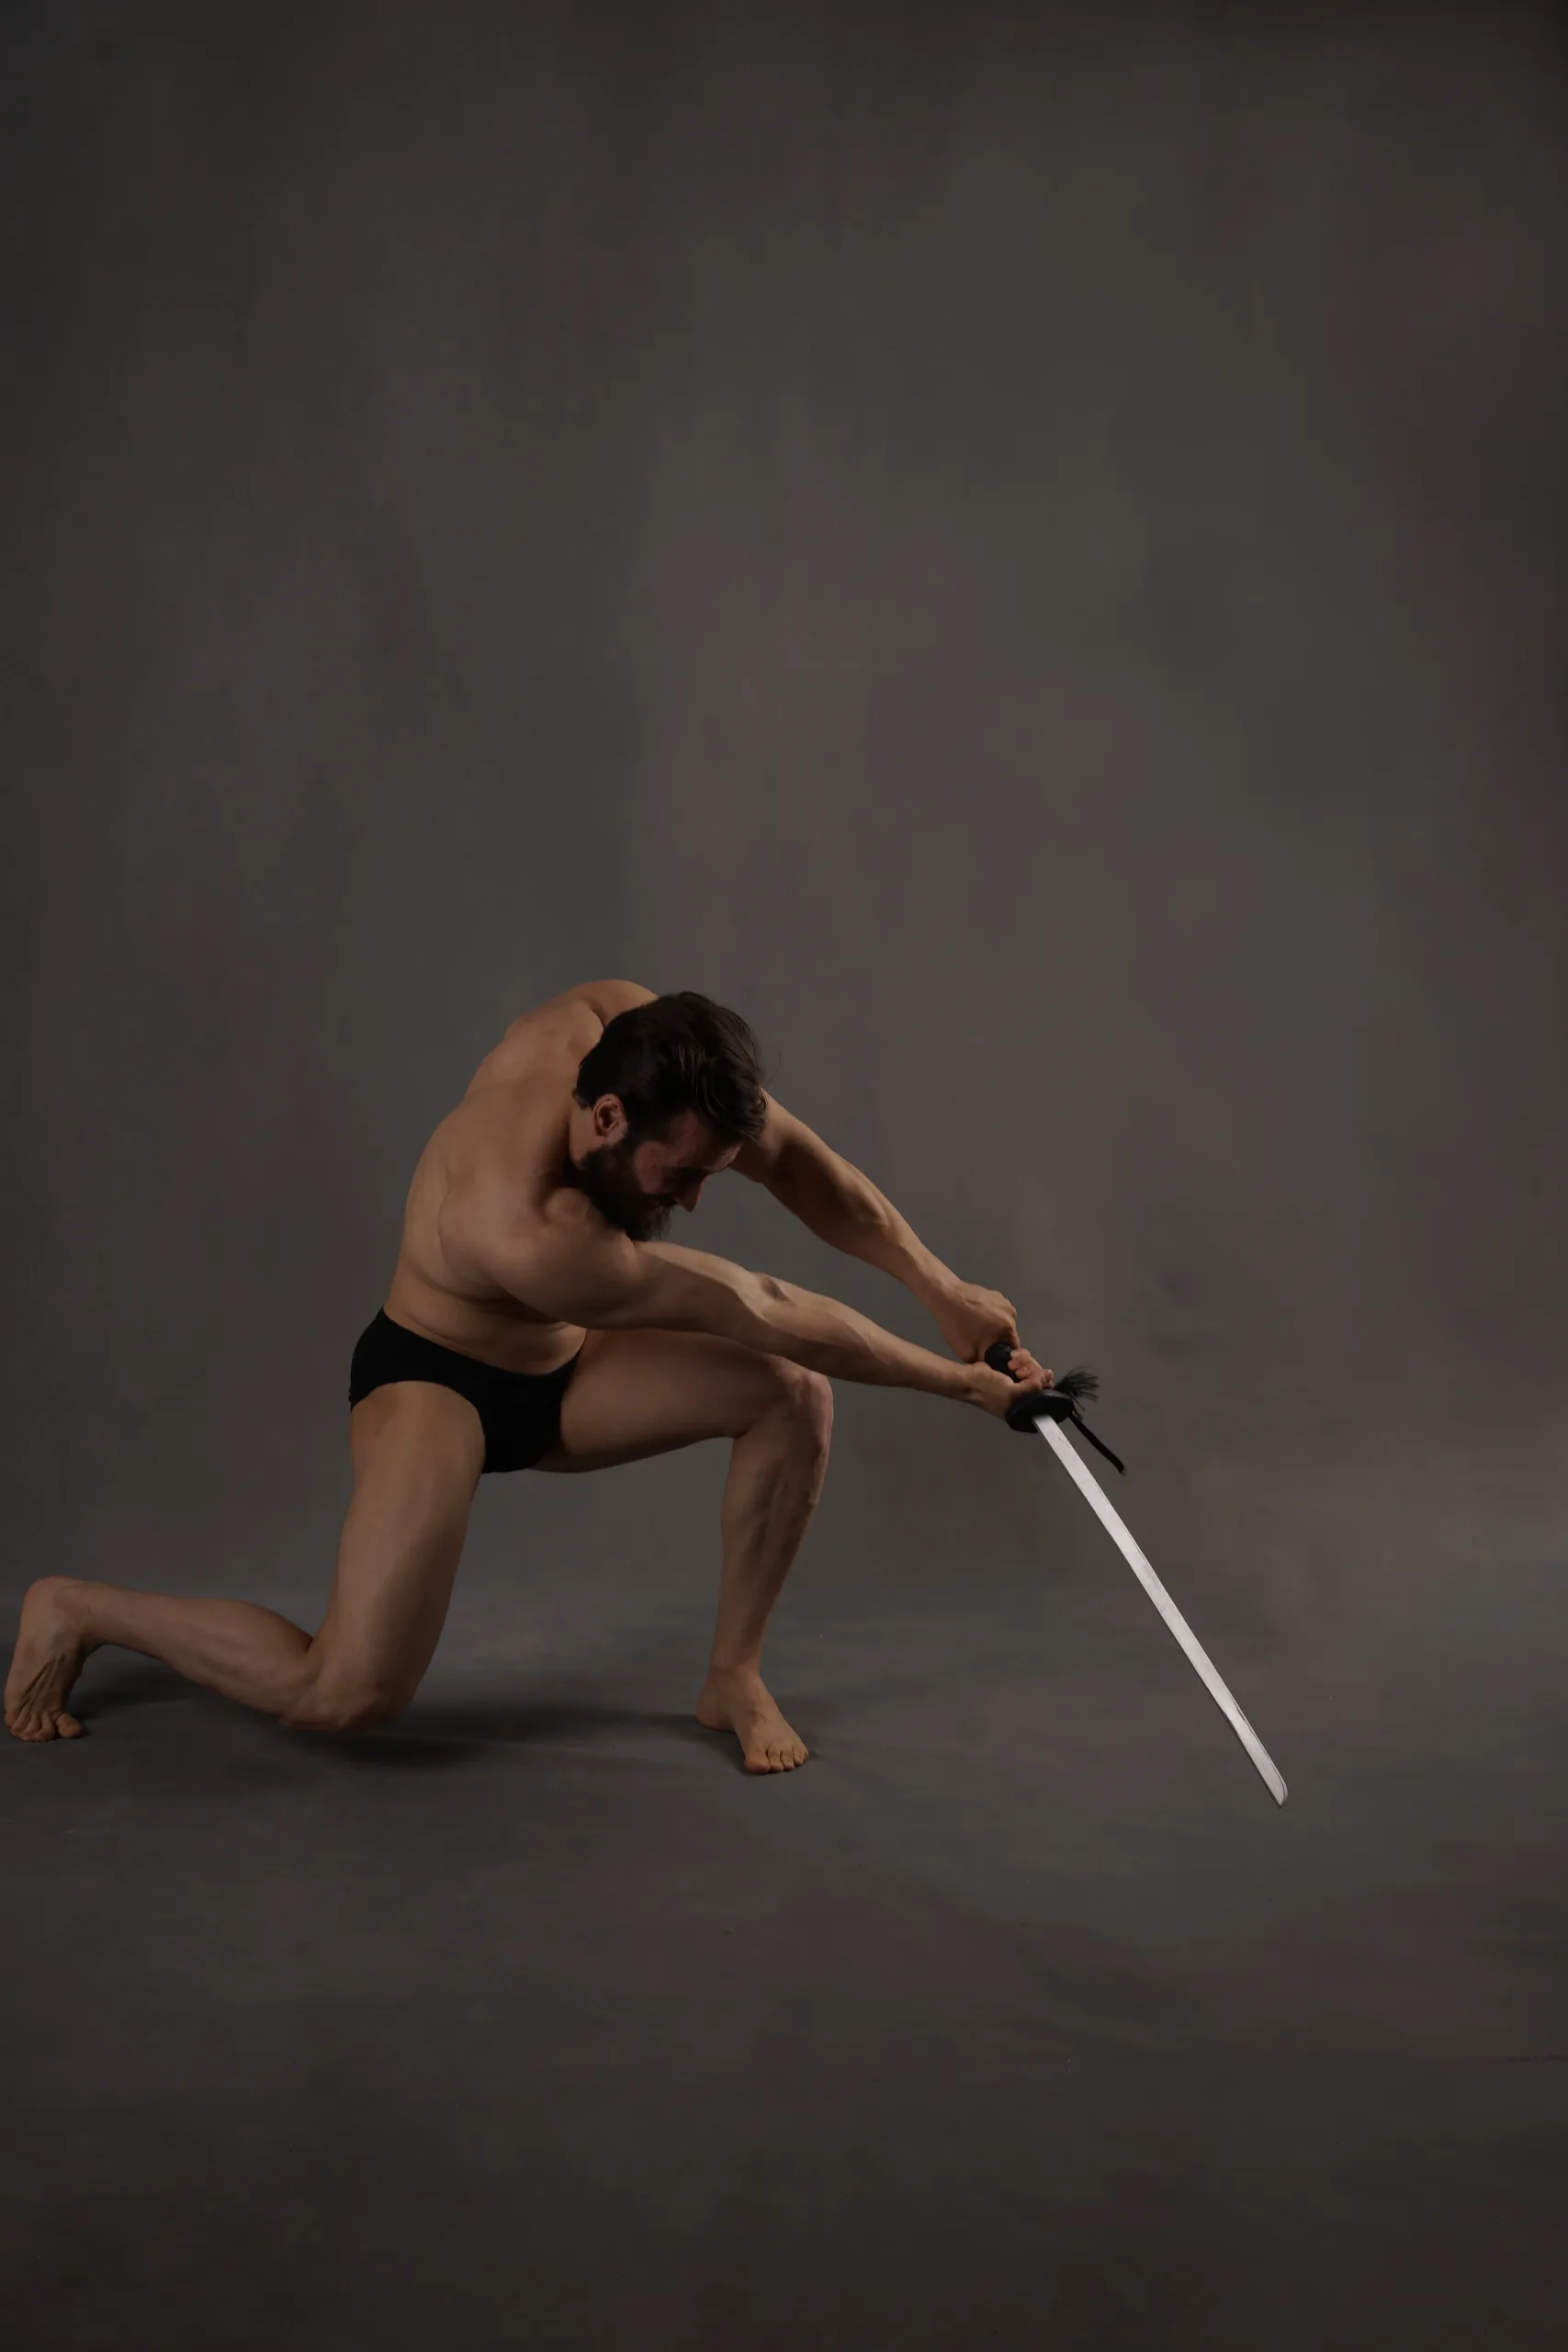 Sword Poses Photo Reference Pack . 436 JPEGs